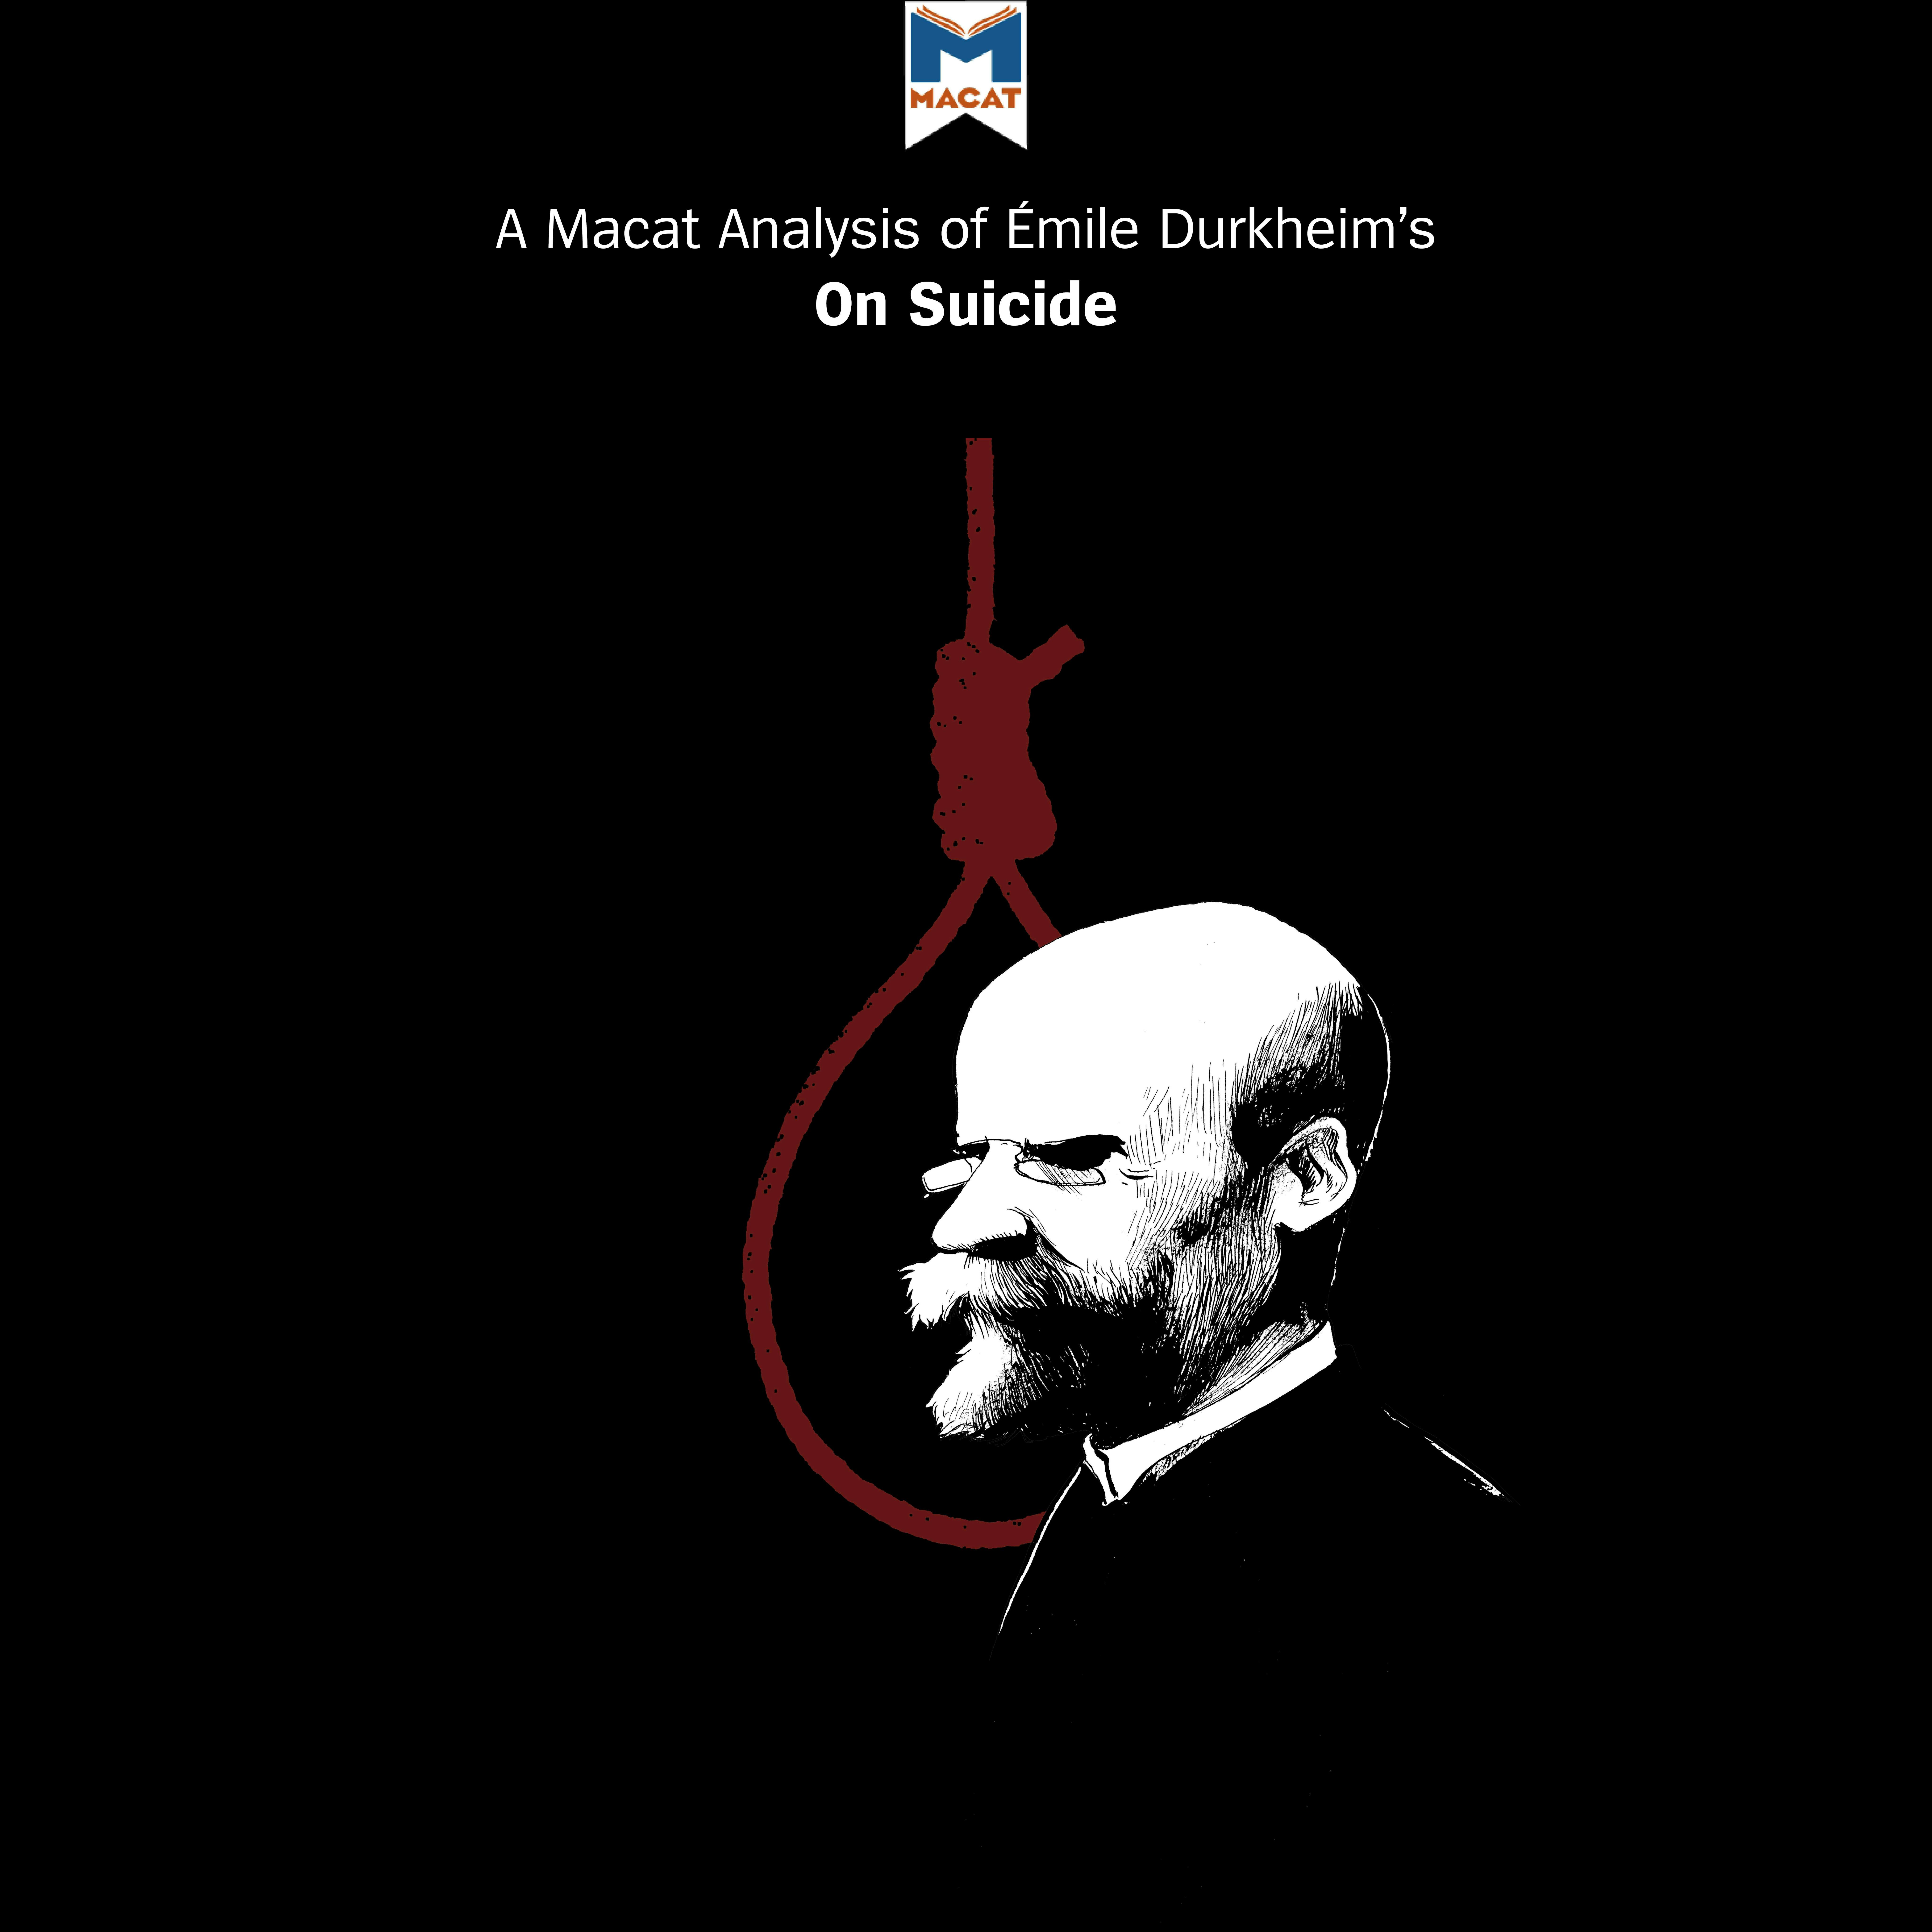 A Macat Analysis of Émile Durkheim's On Suicide - undefined